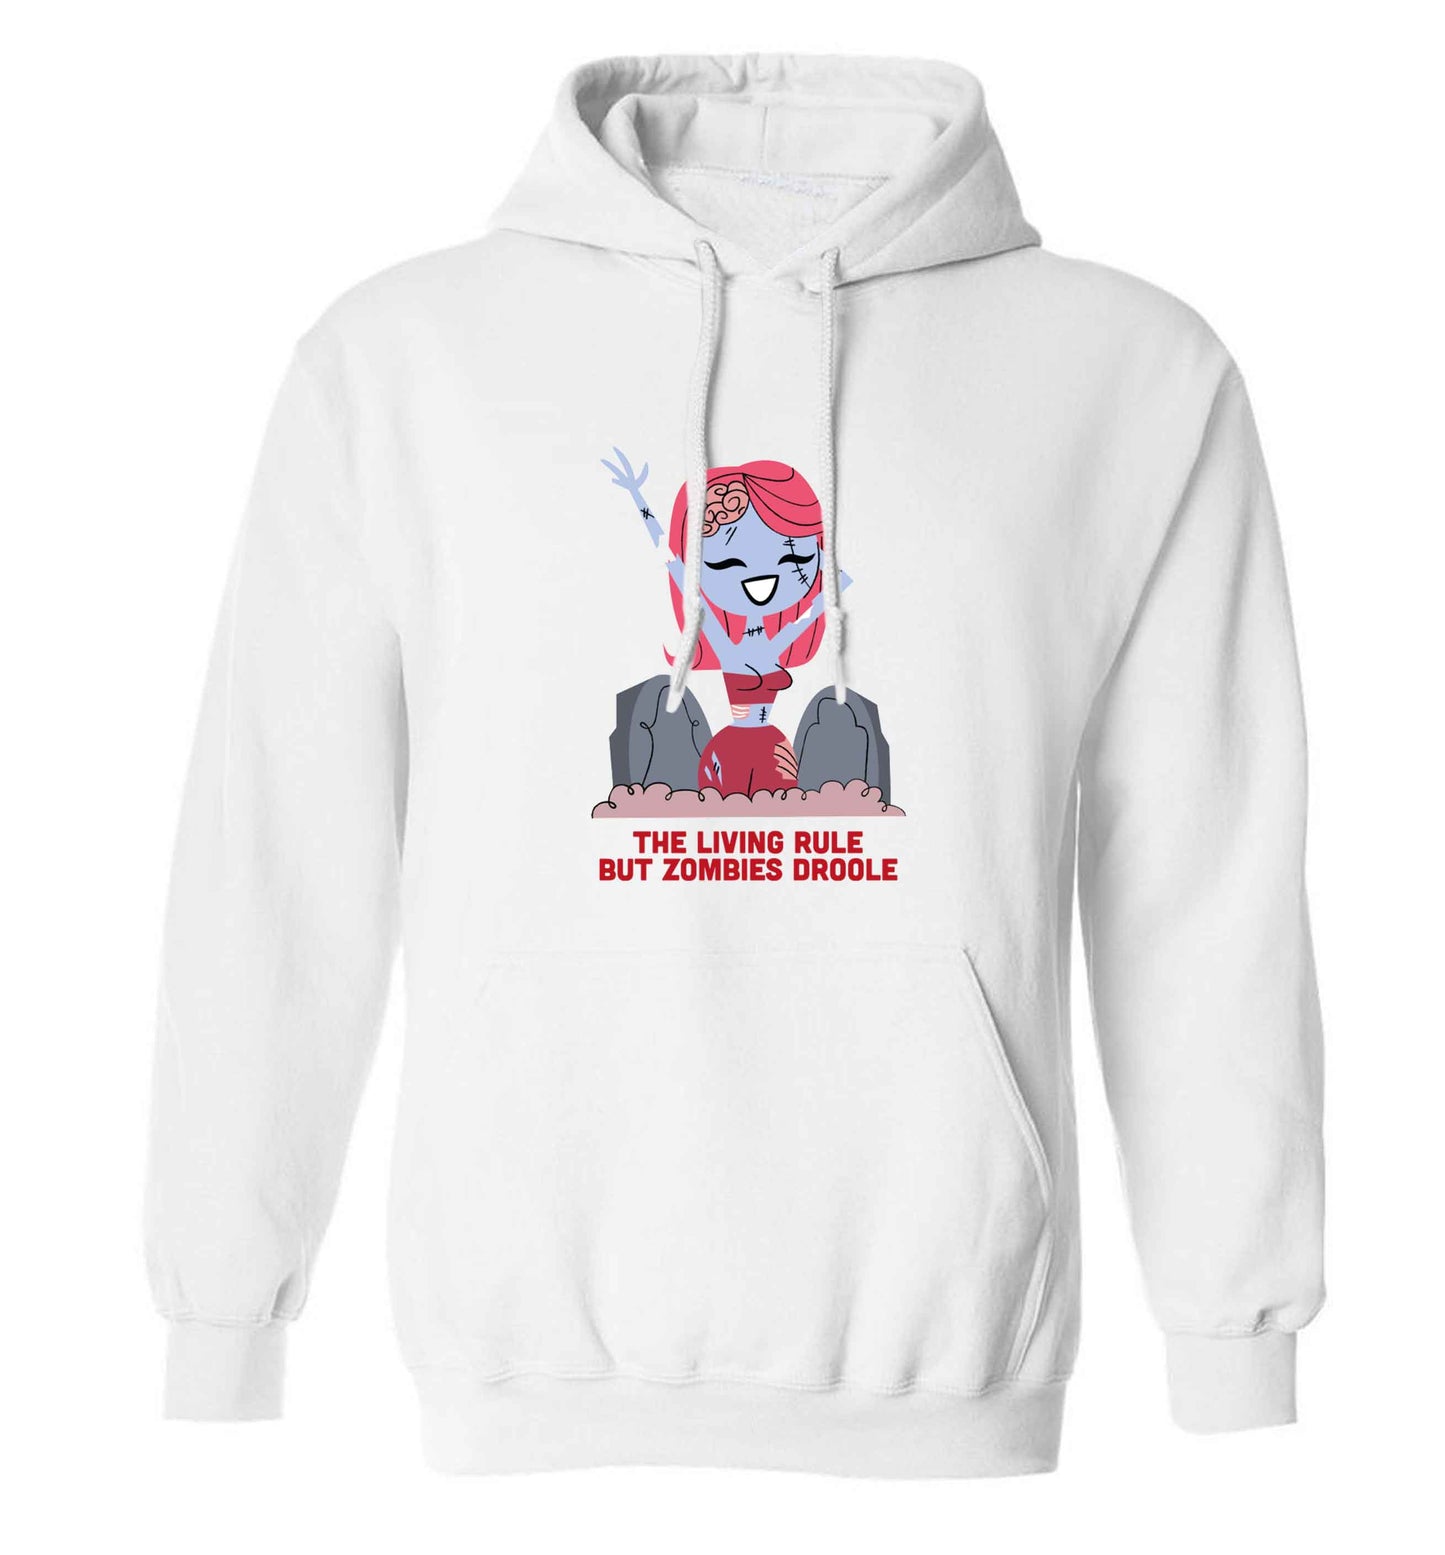 Living rule but zombies droole adults unisex white hoodie 2XL